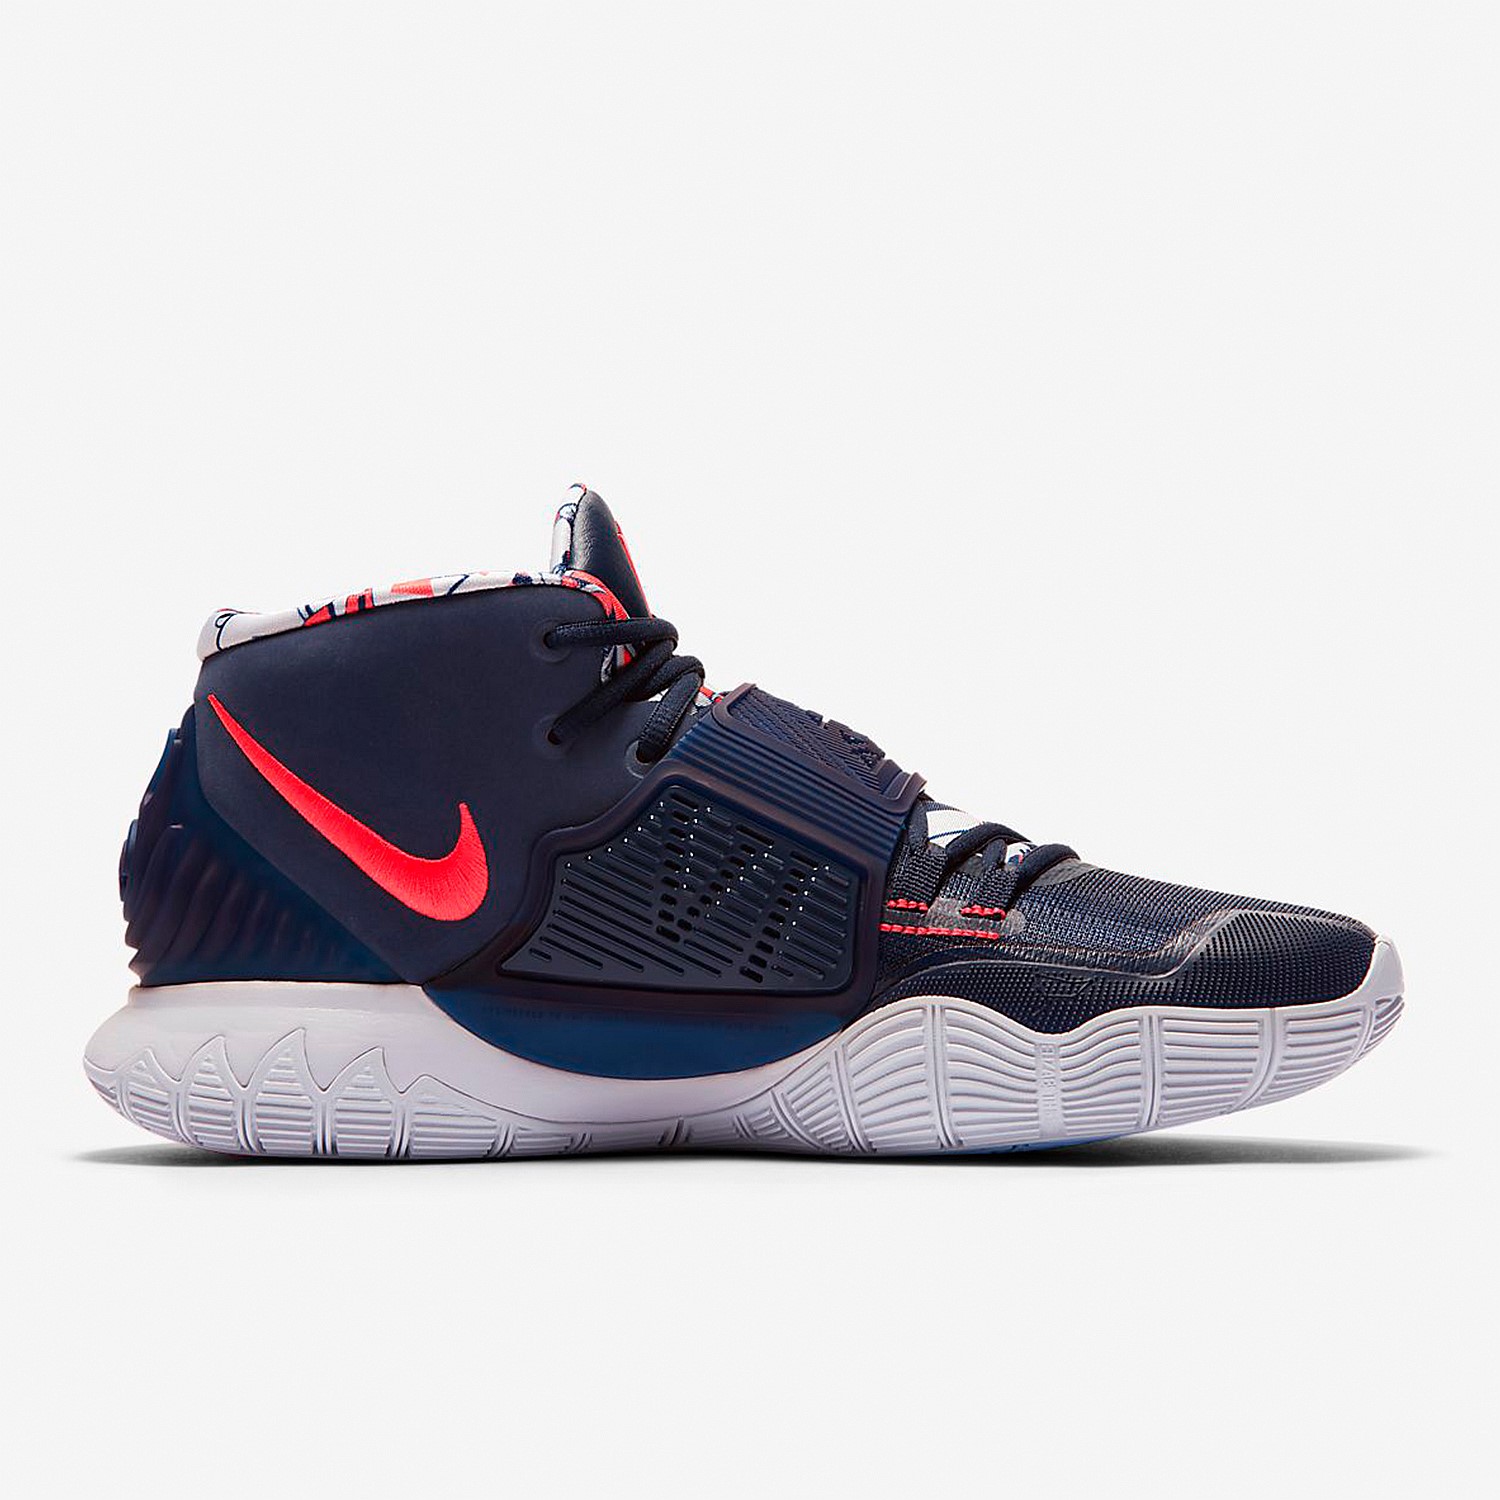 Stirling Sports - Kyrie 6 Mens